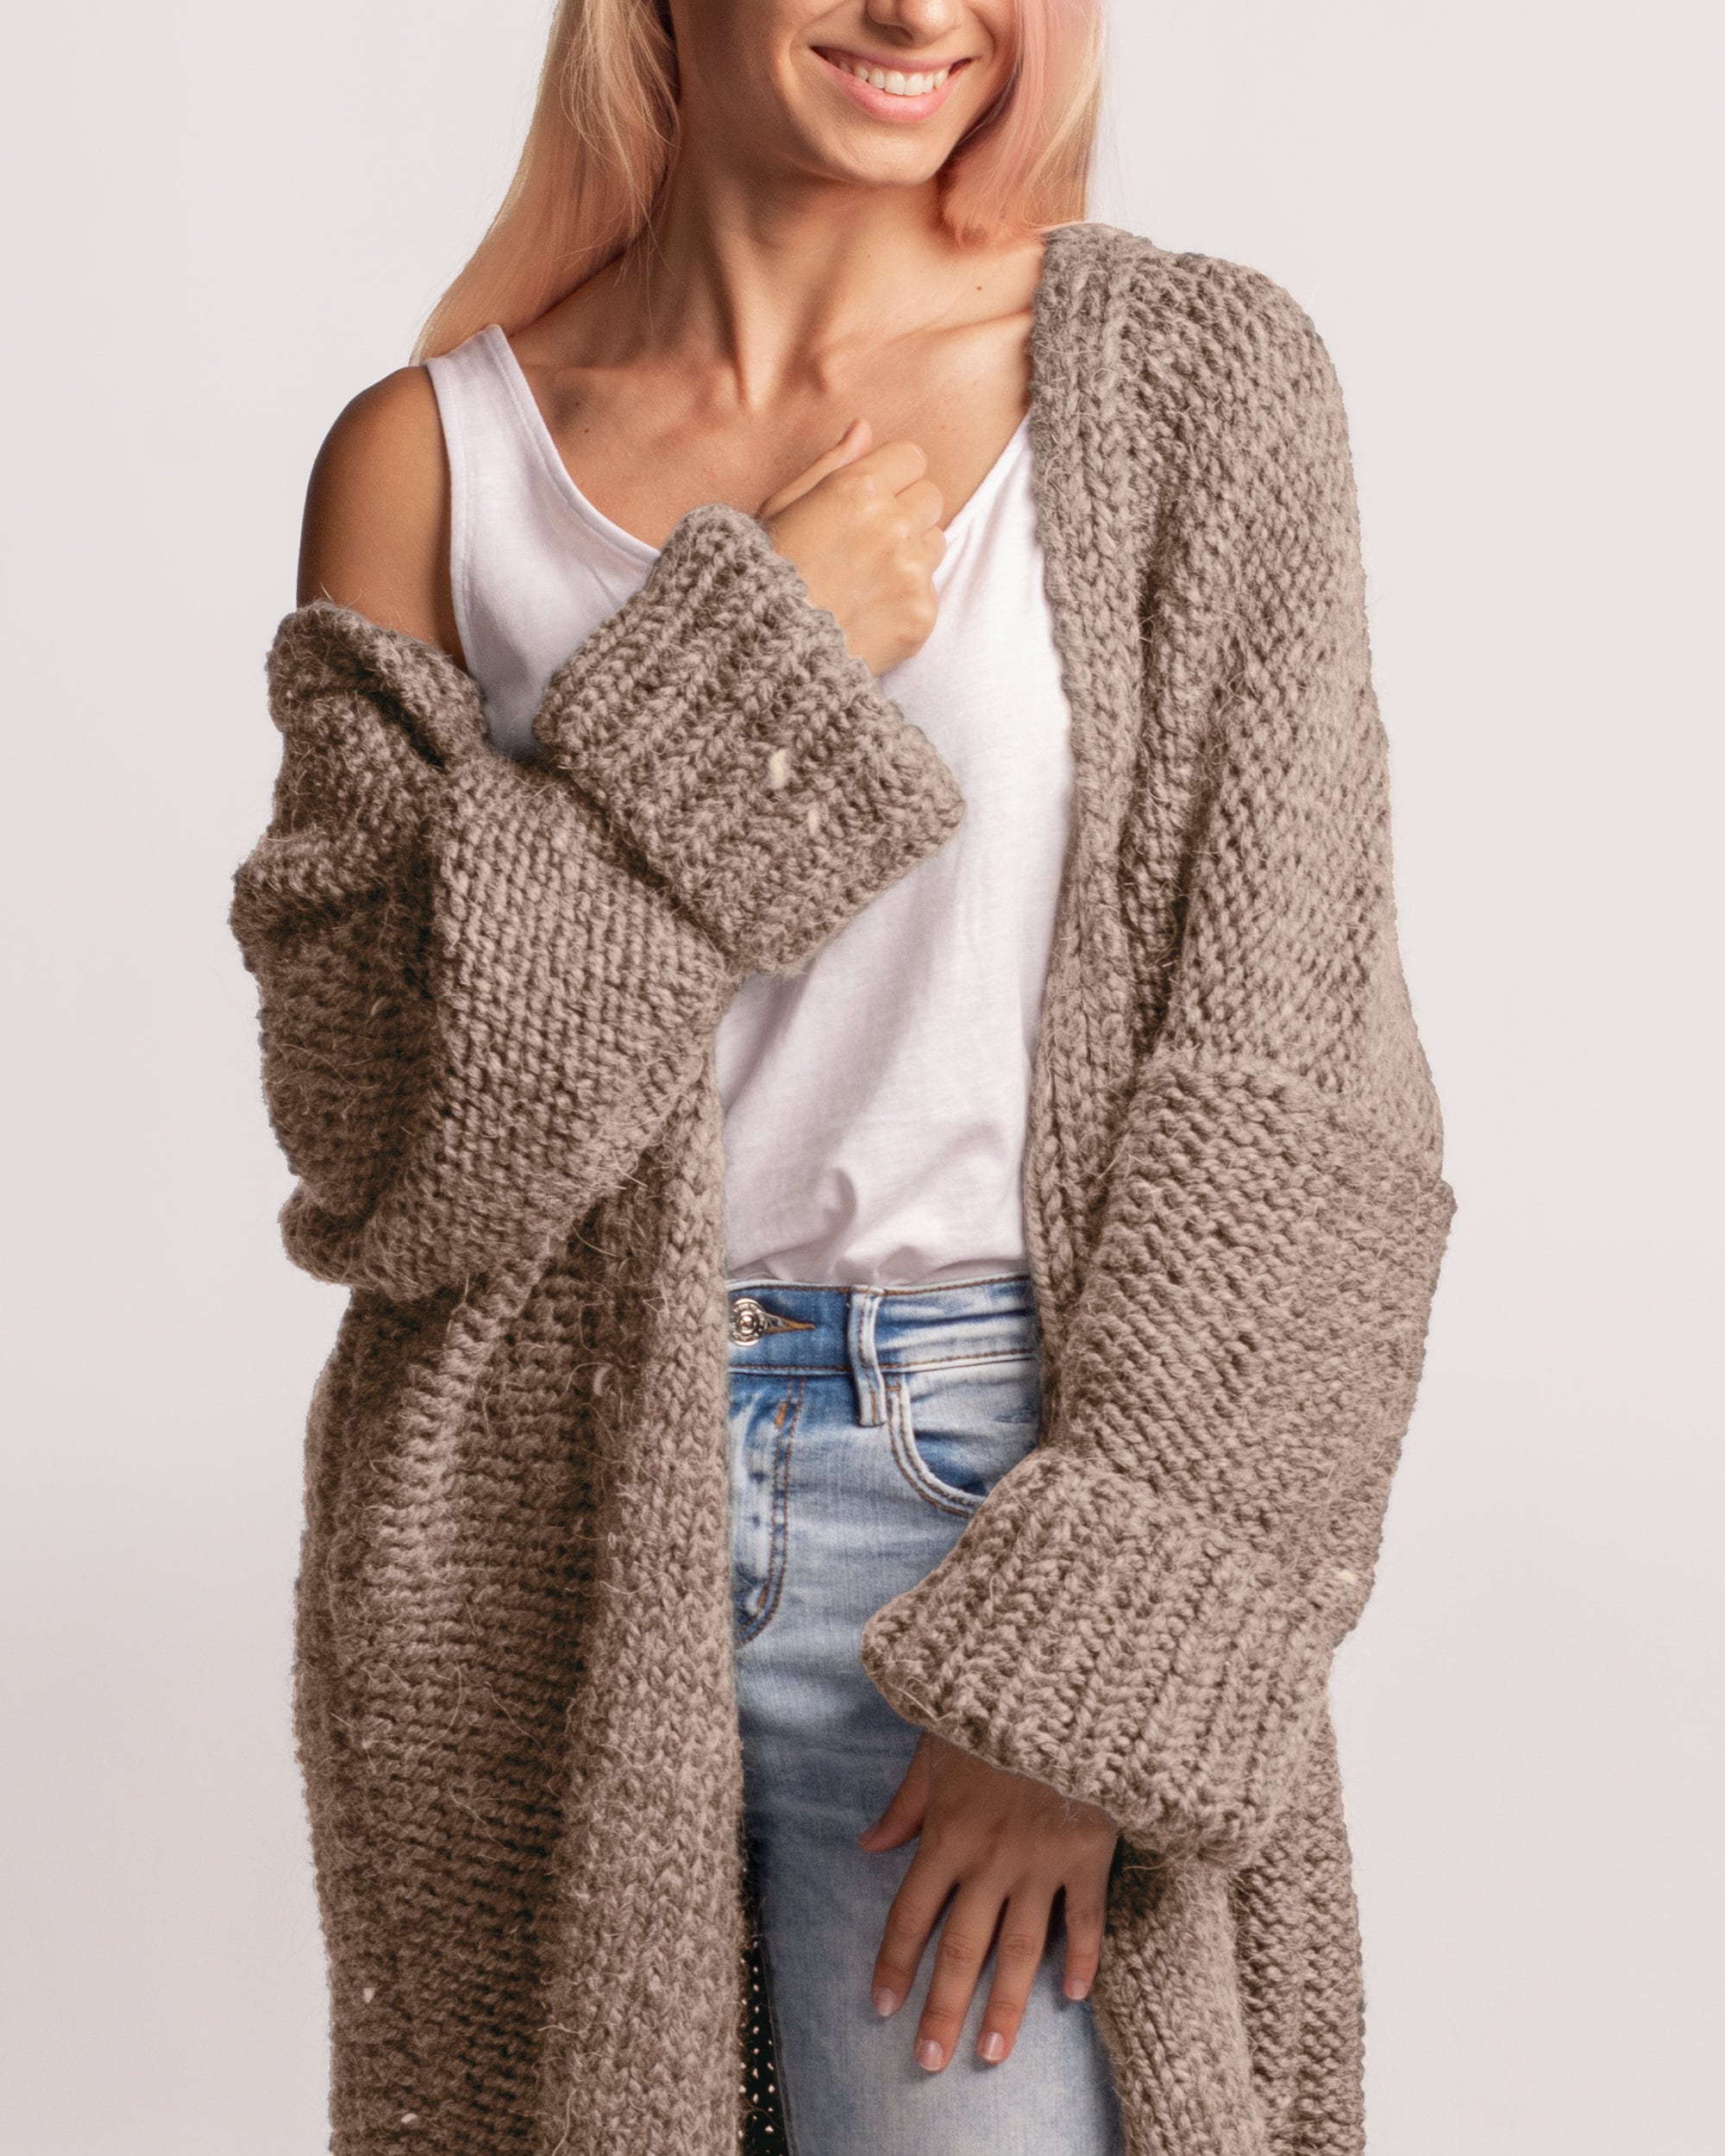 The Limited Women Cardigan Sweater Knitted Long Sleeves Beige Size